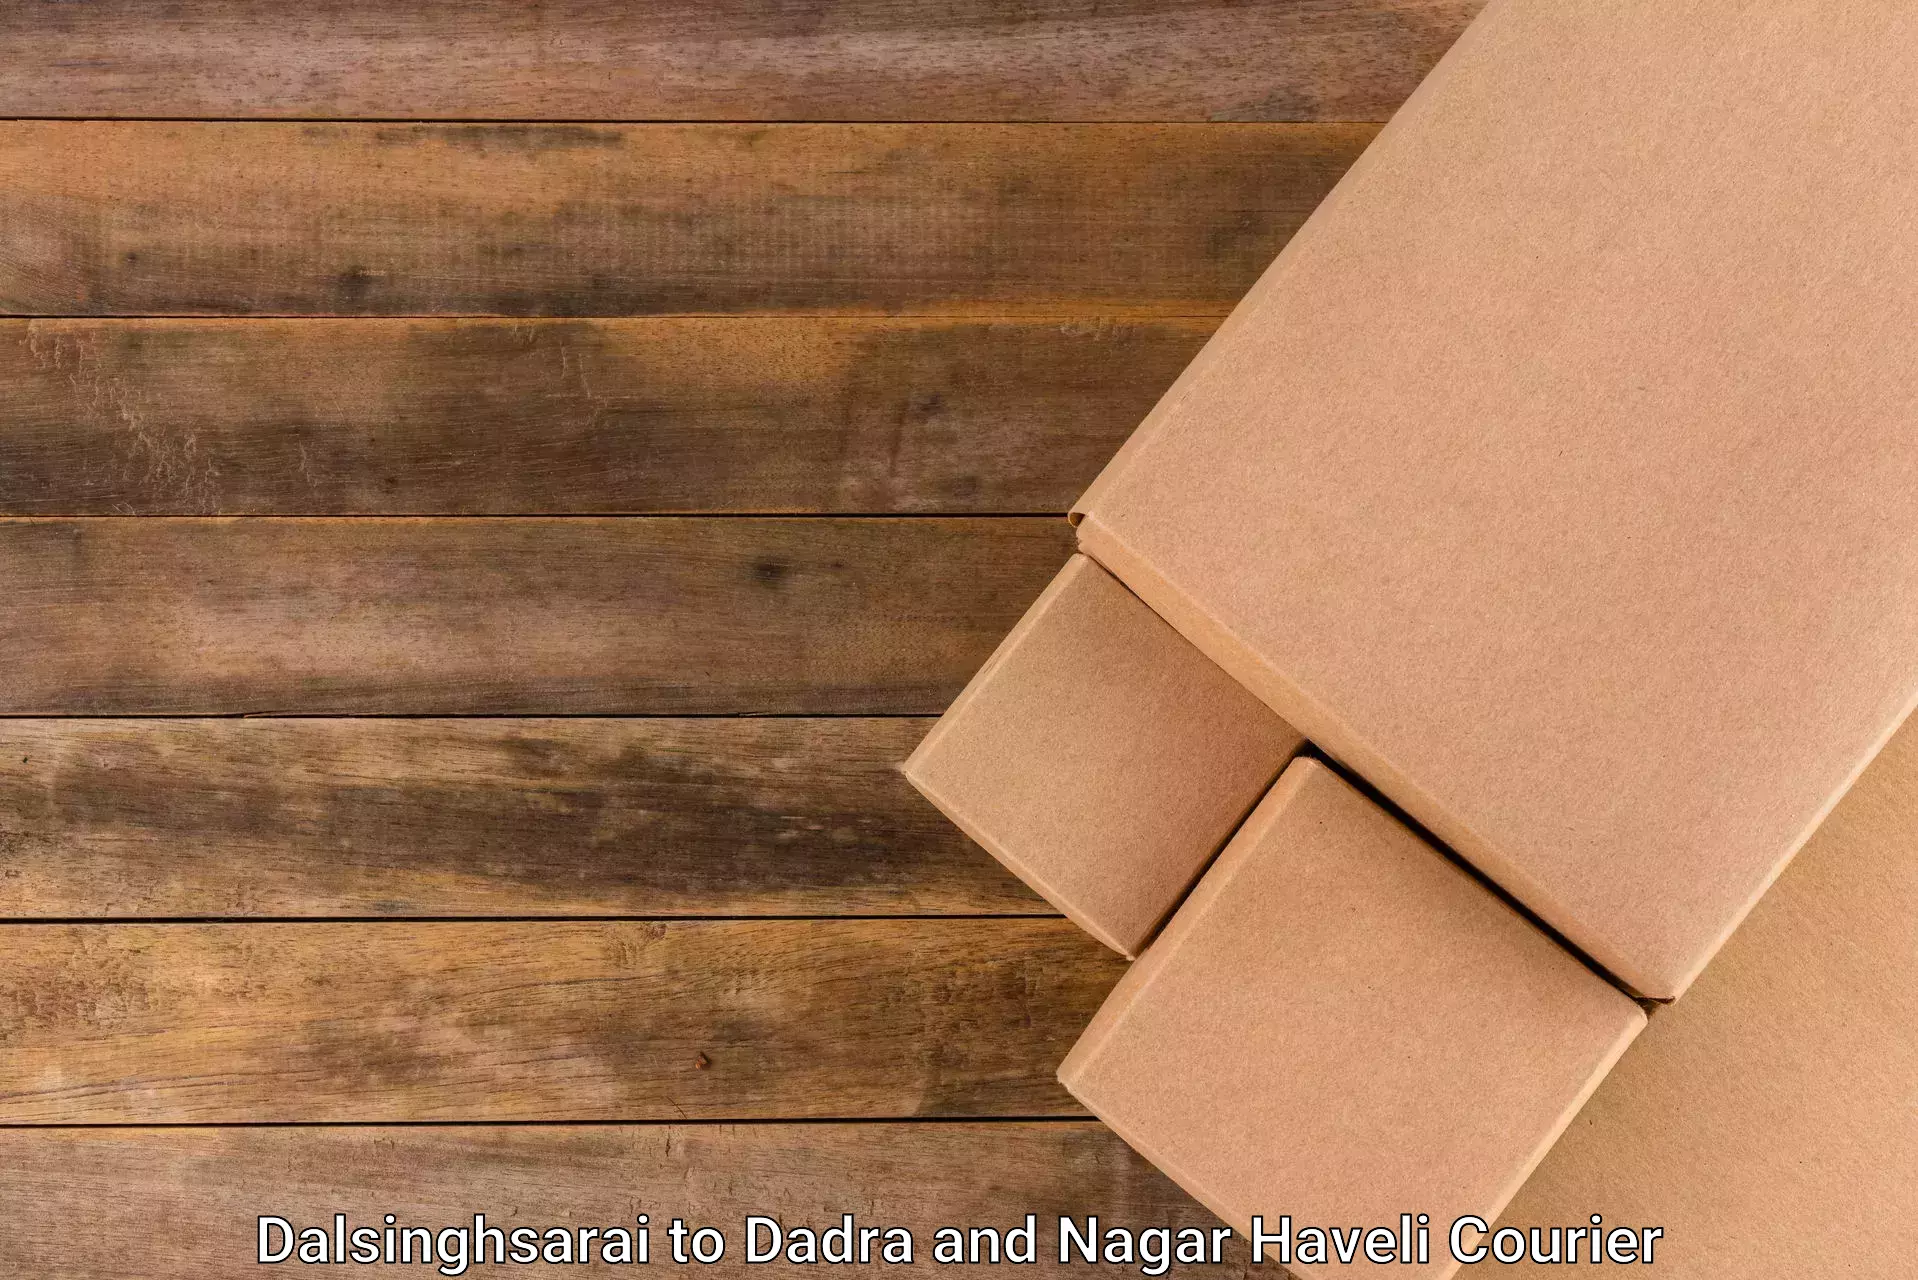 Dynamic courier operations Dalsinghsarai to Dadra and Nagar Haveli